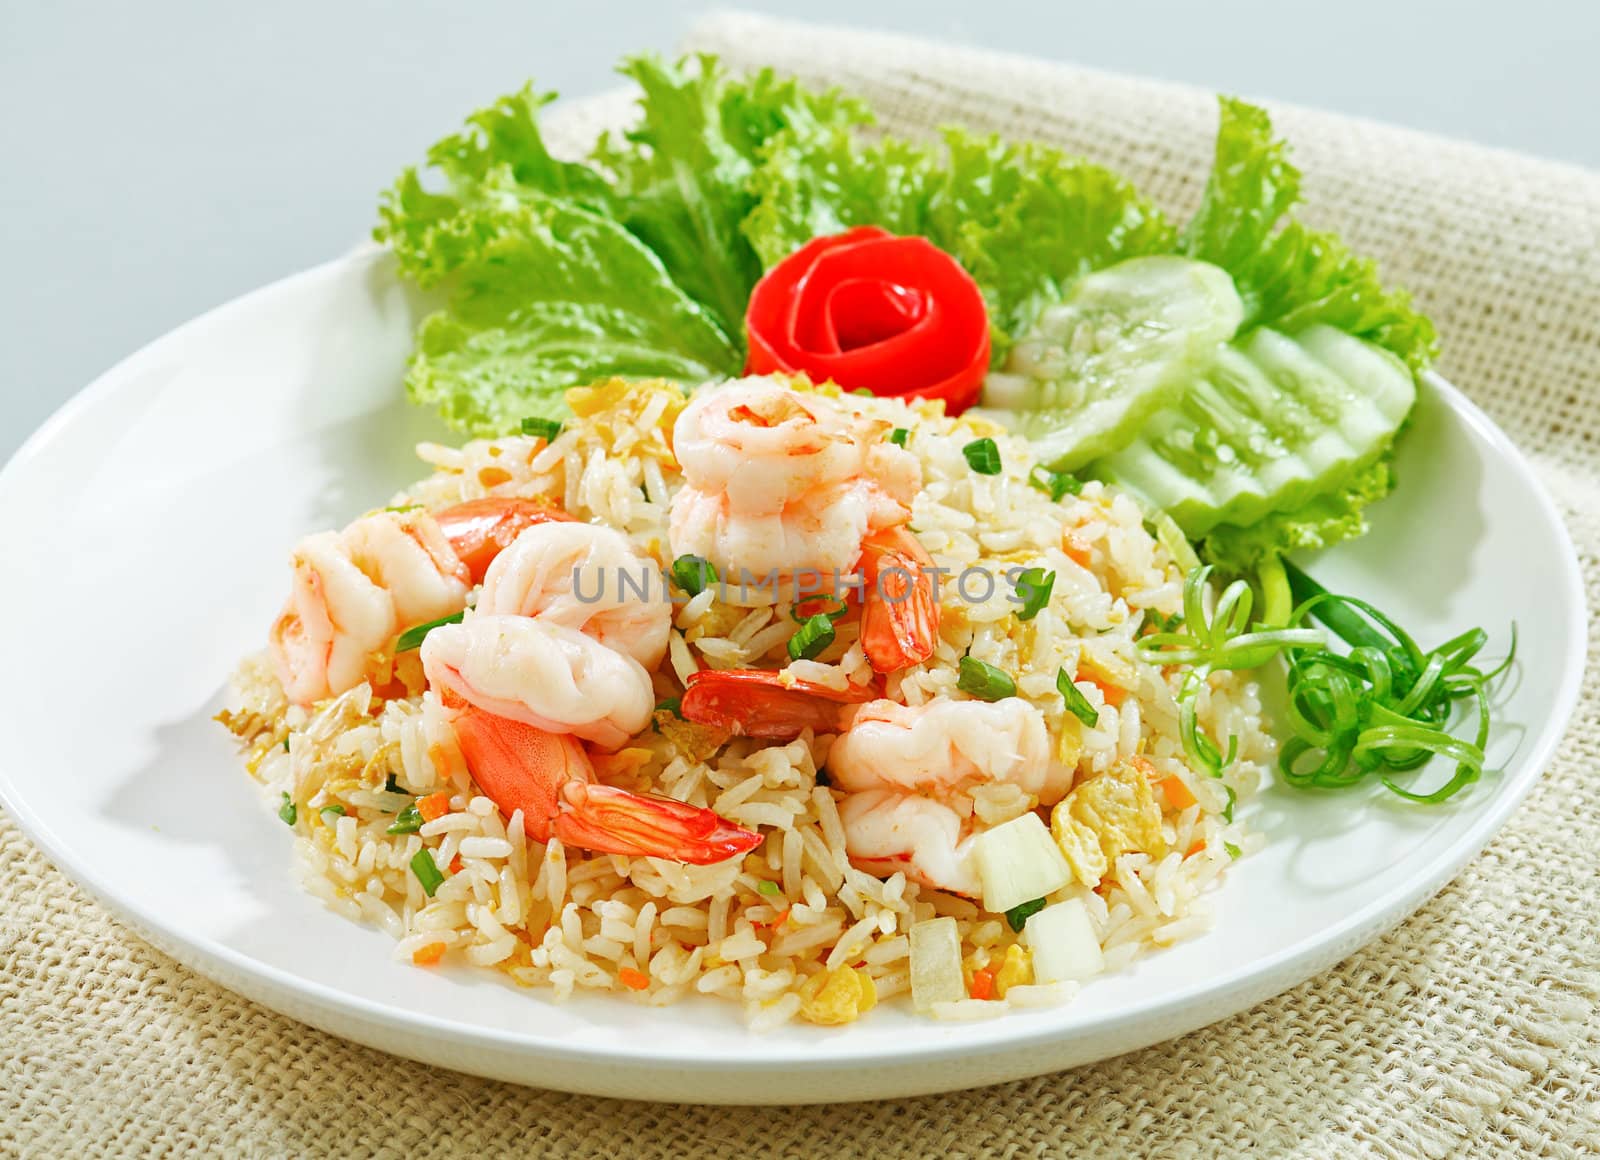 Fried rice with shrimp or prawn a taste of asian food isolated